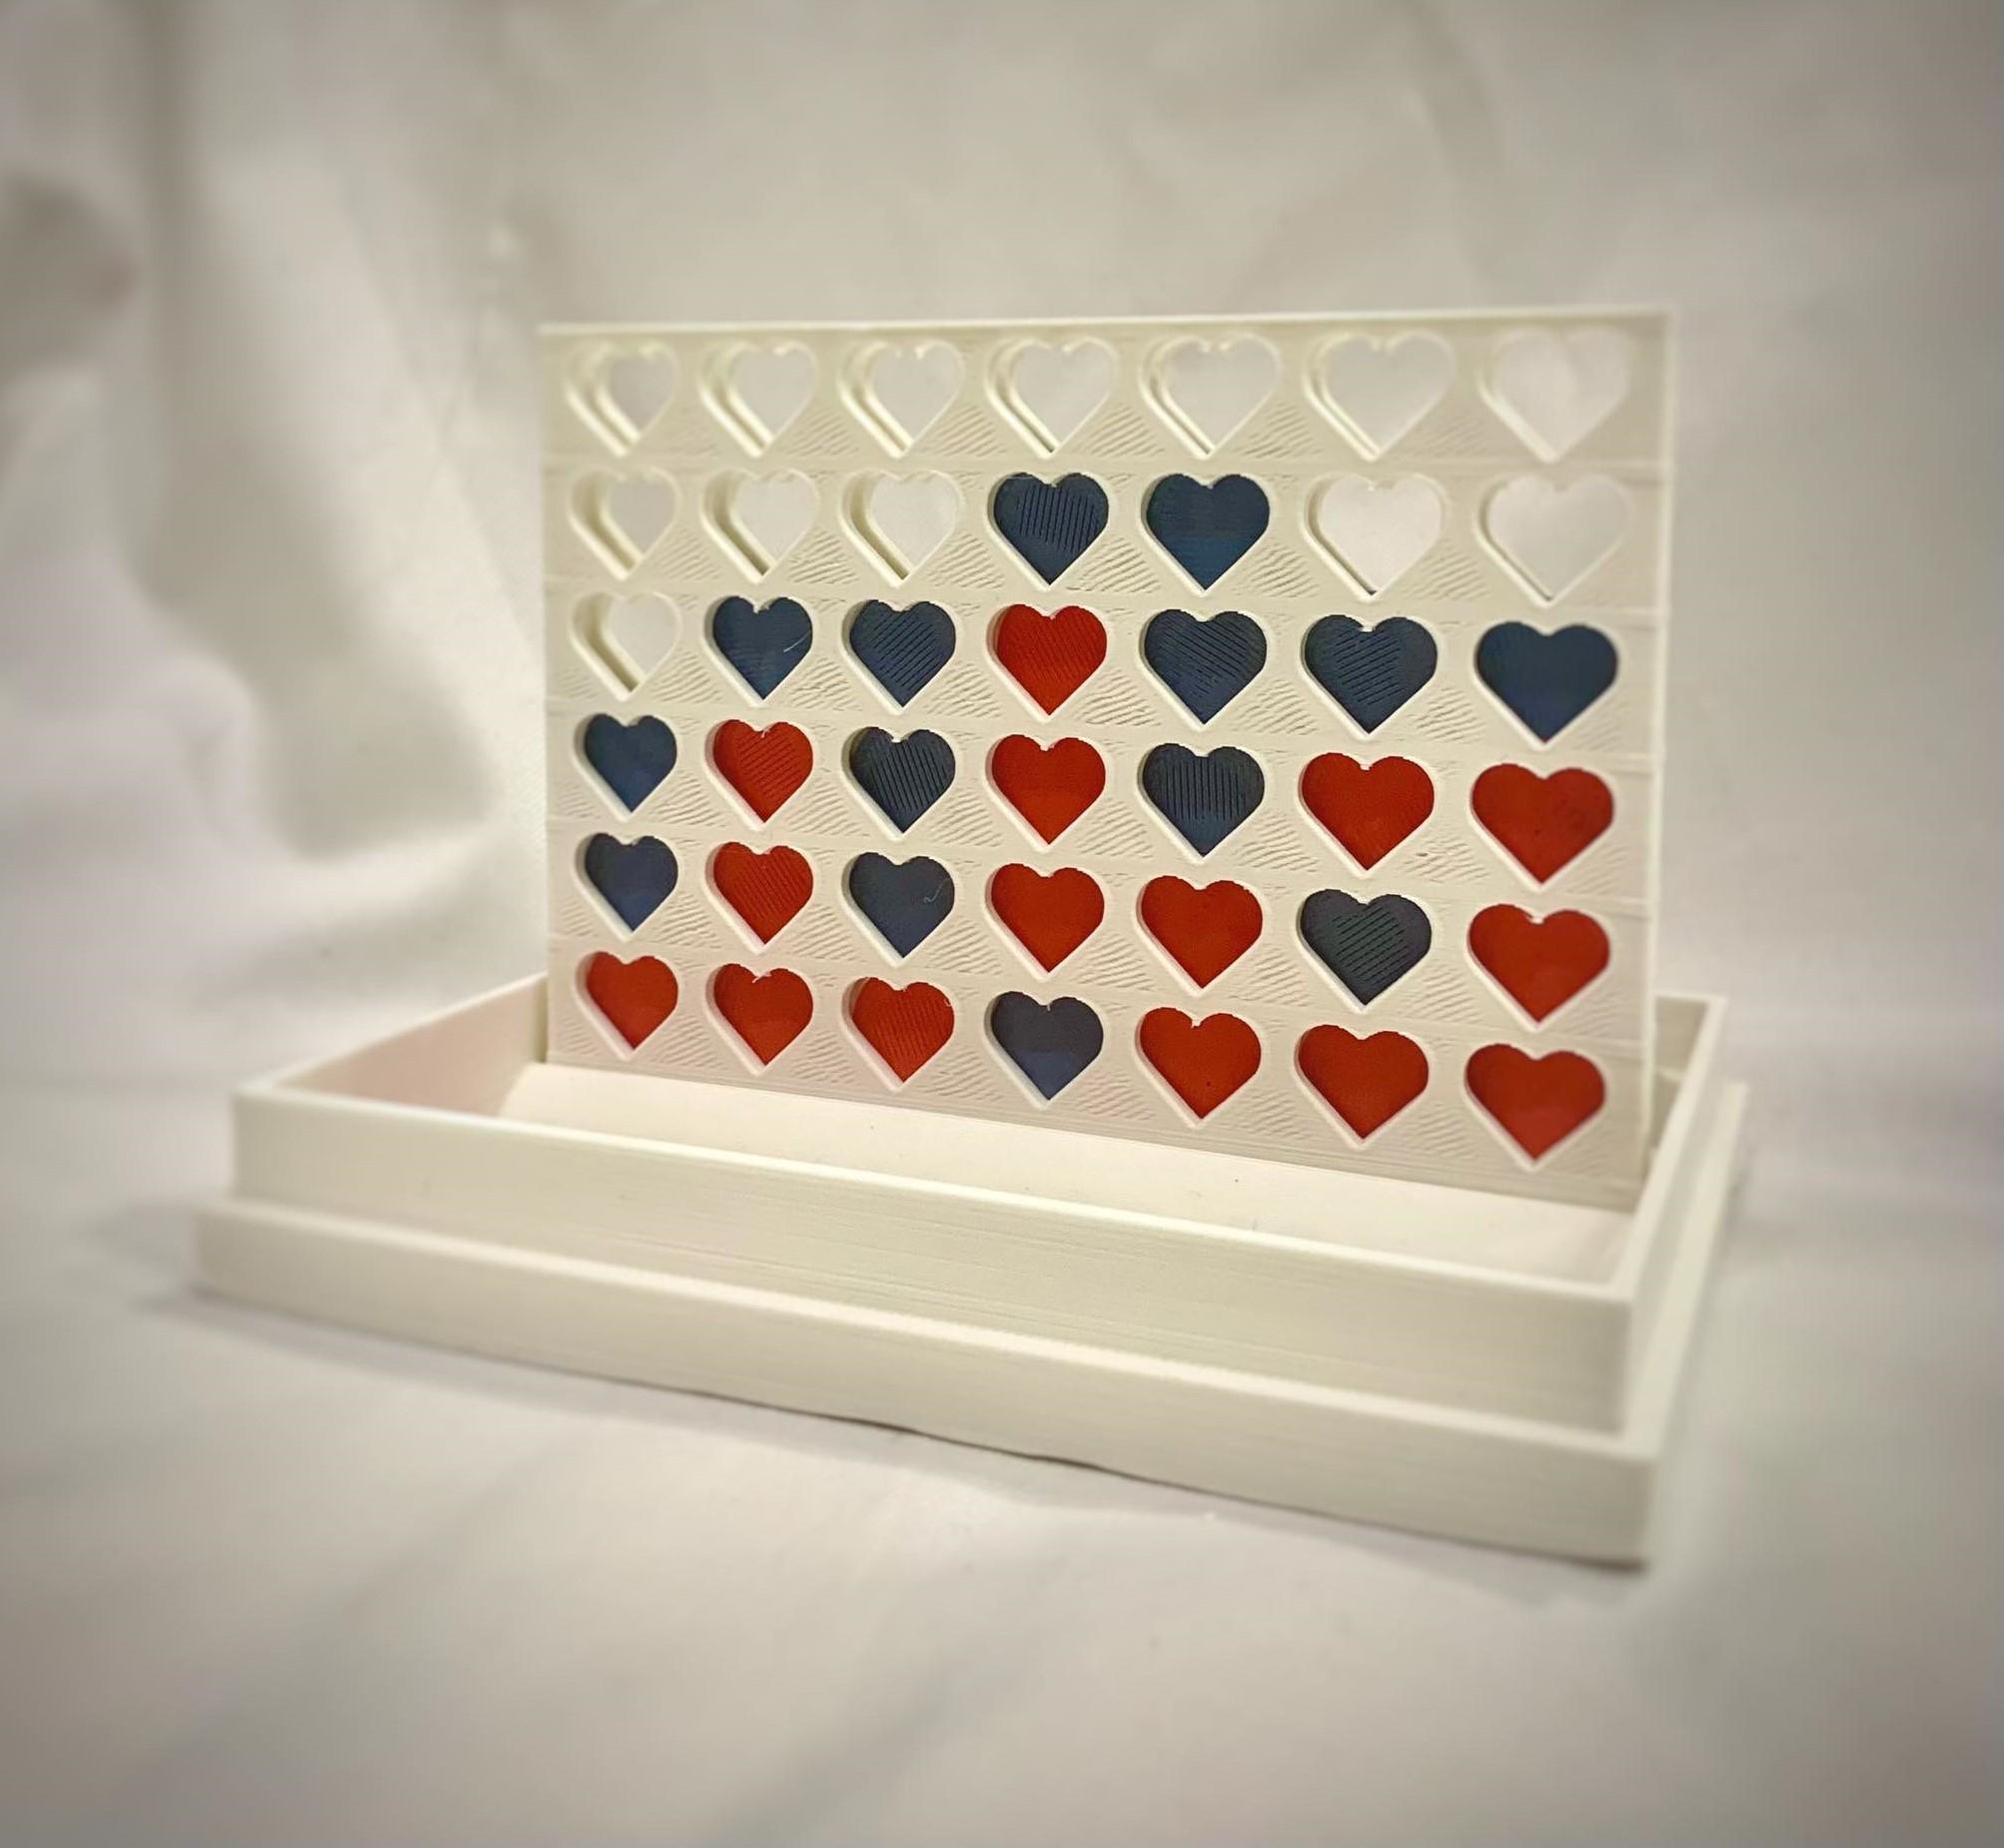 4 In A Row Hearts 3d model